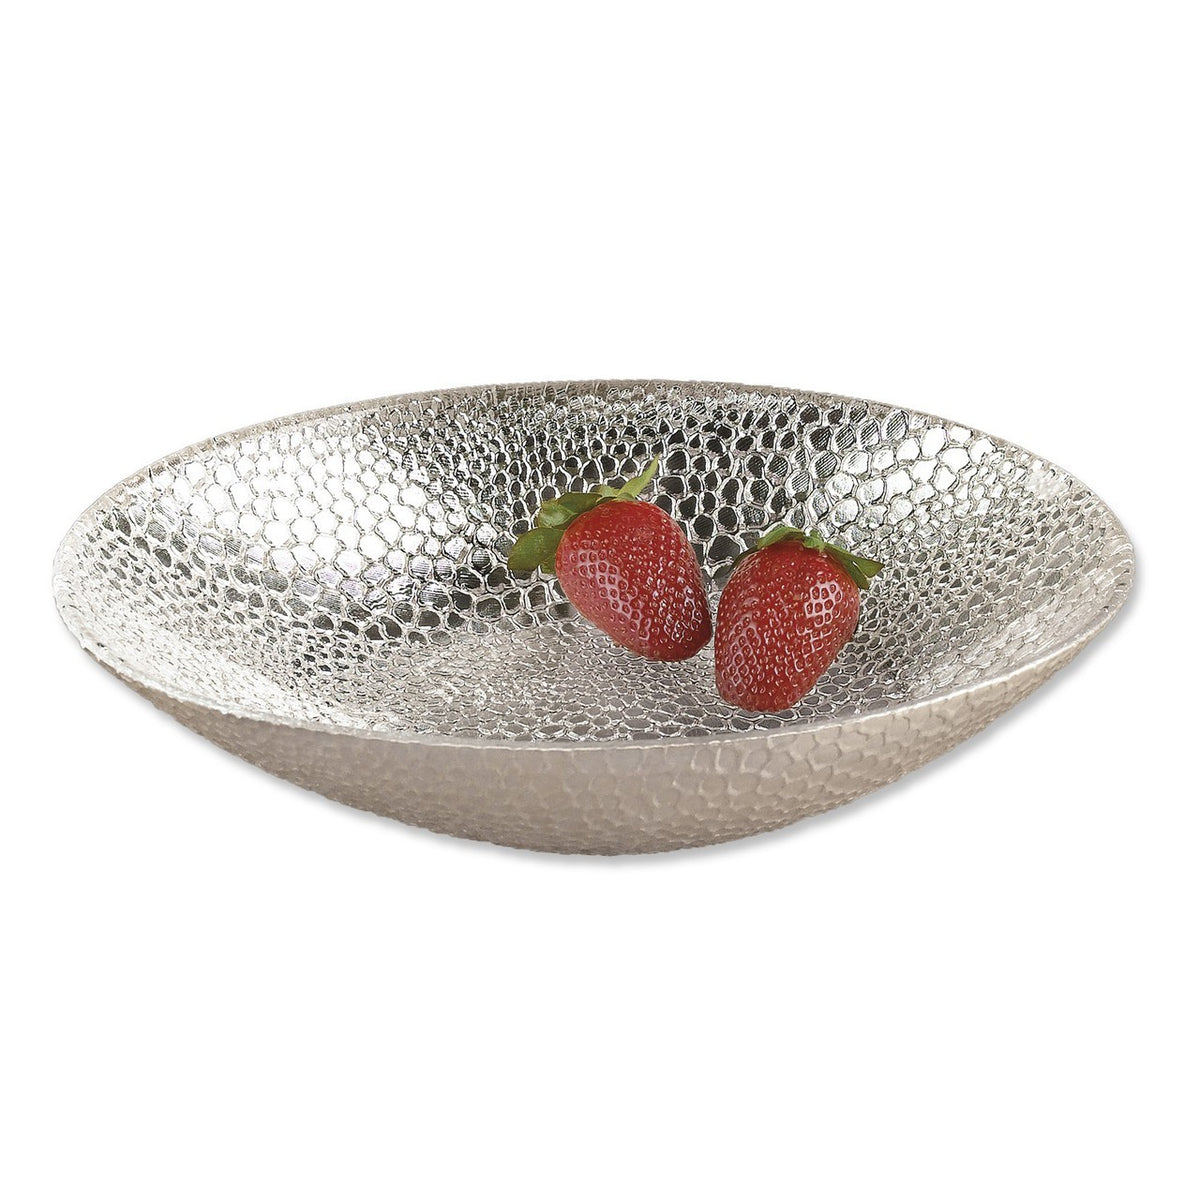 Authentic Silver-plated Snakeskin Oval Bowl